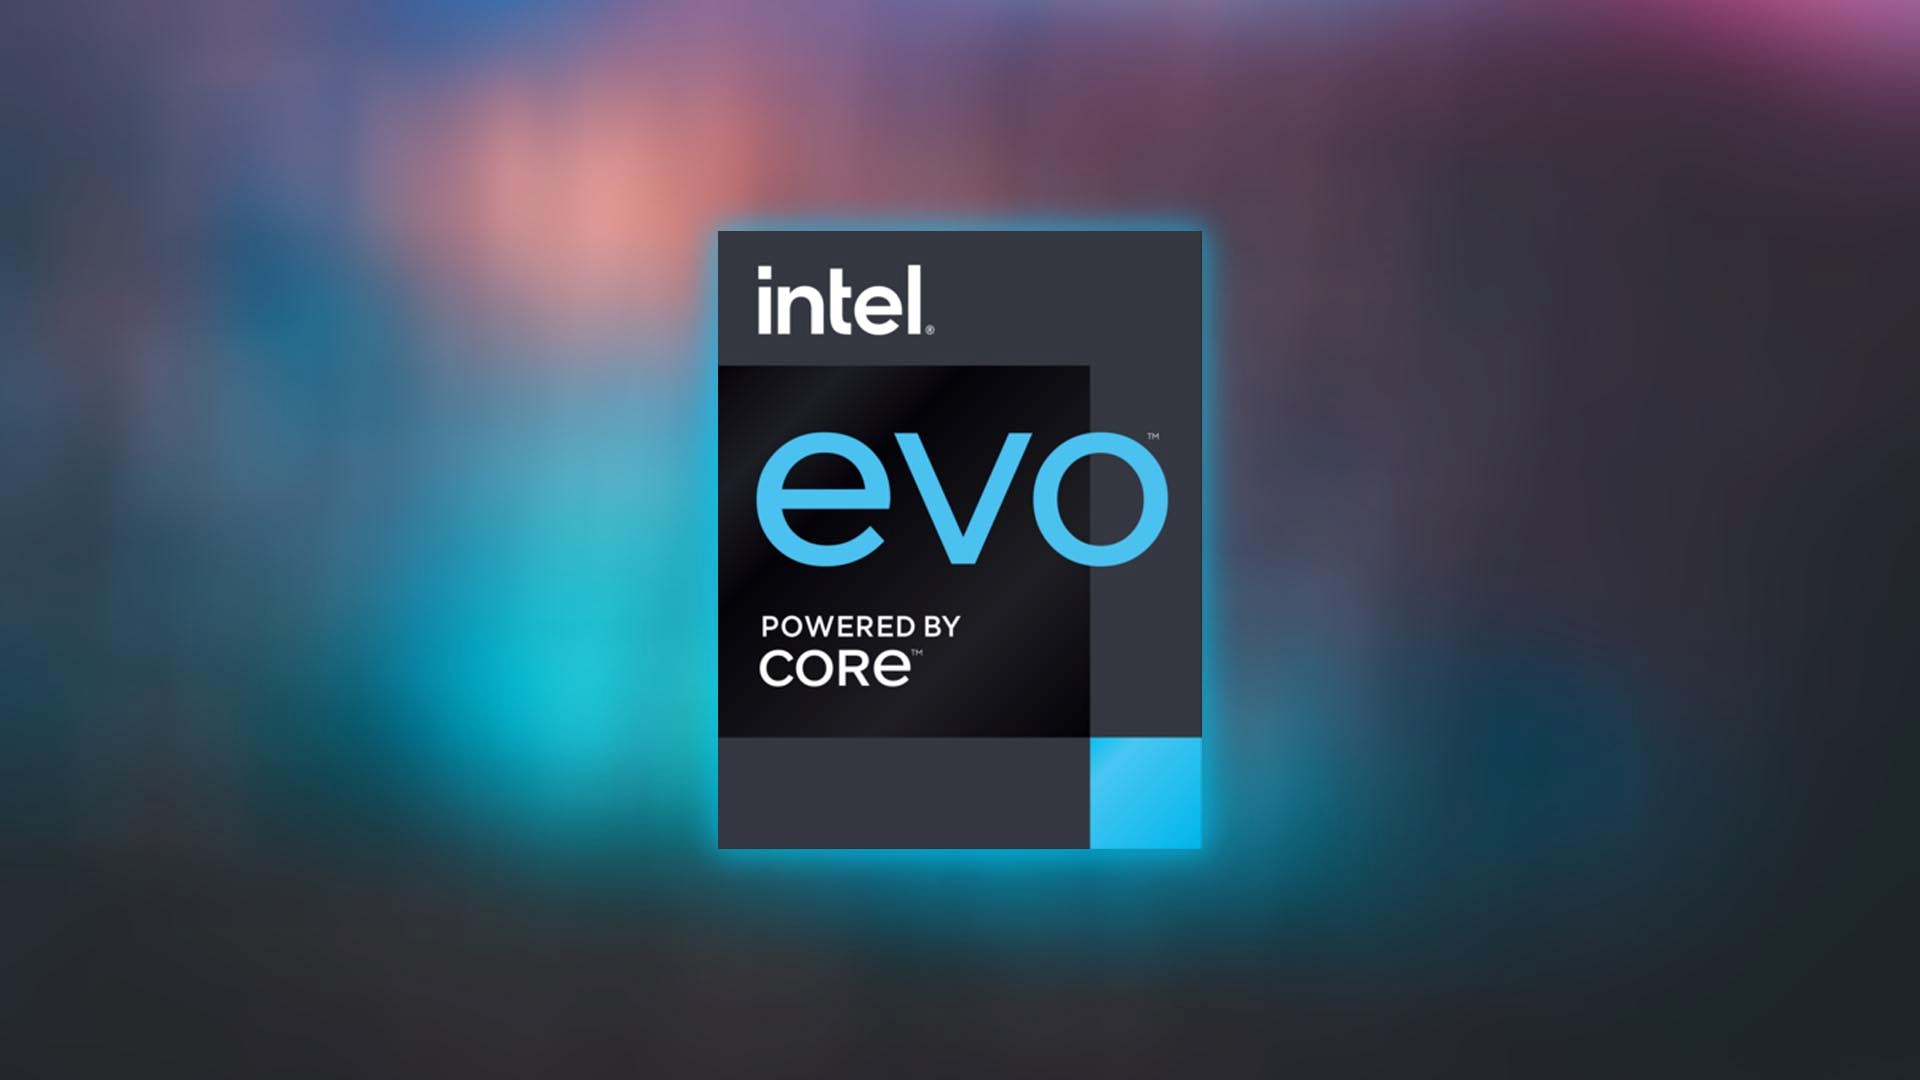 Intel is working with Kensington to leverage the power of Intel Evo processors on high-performing accessories